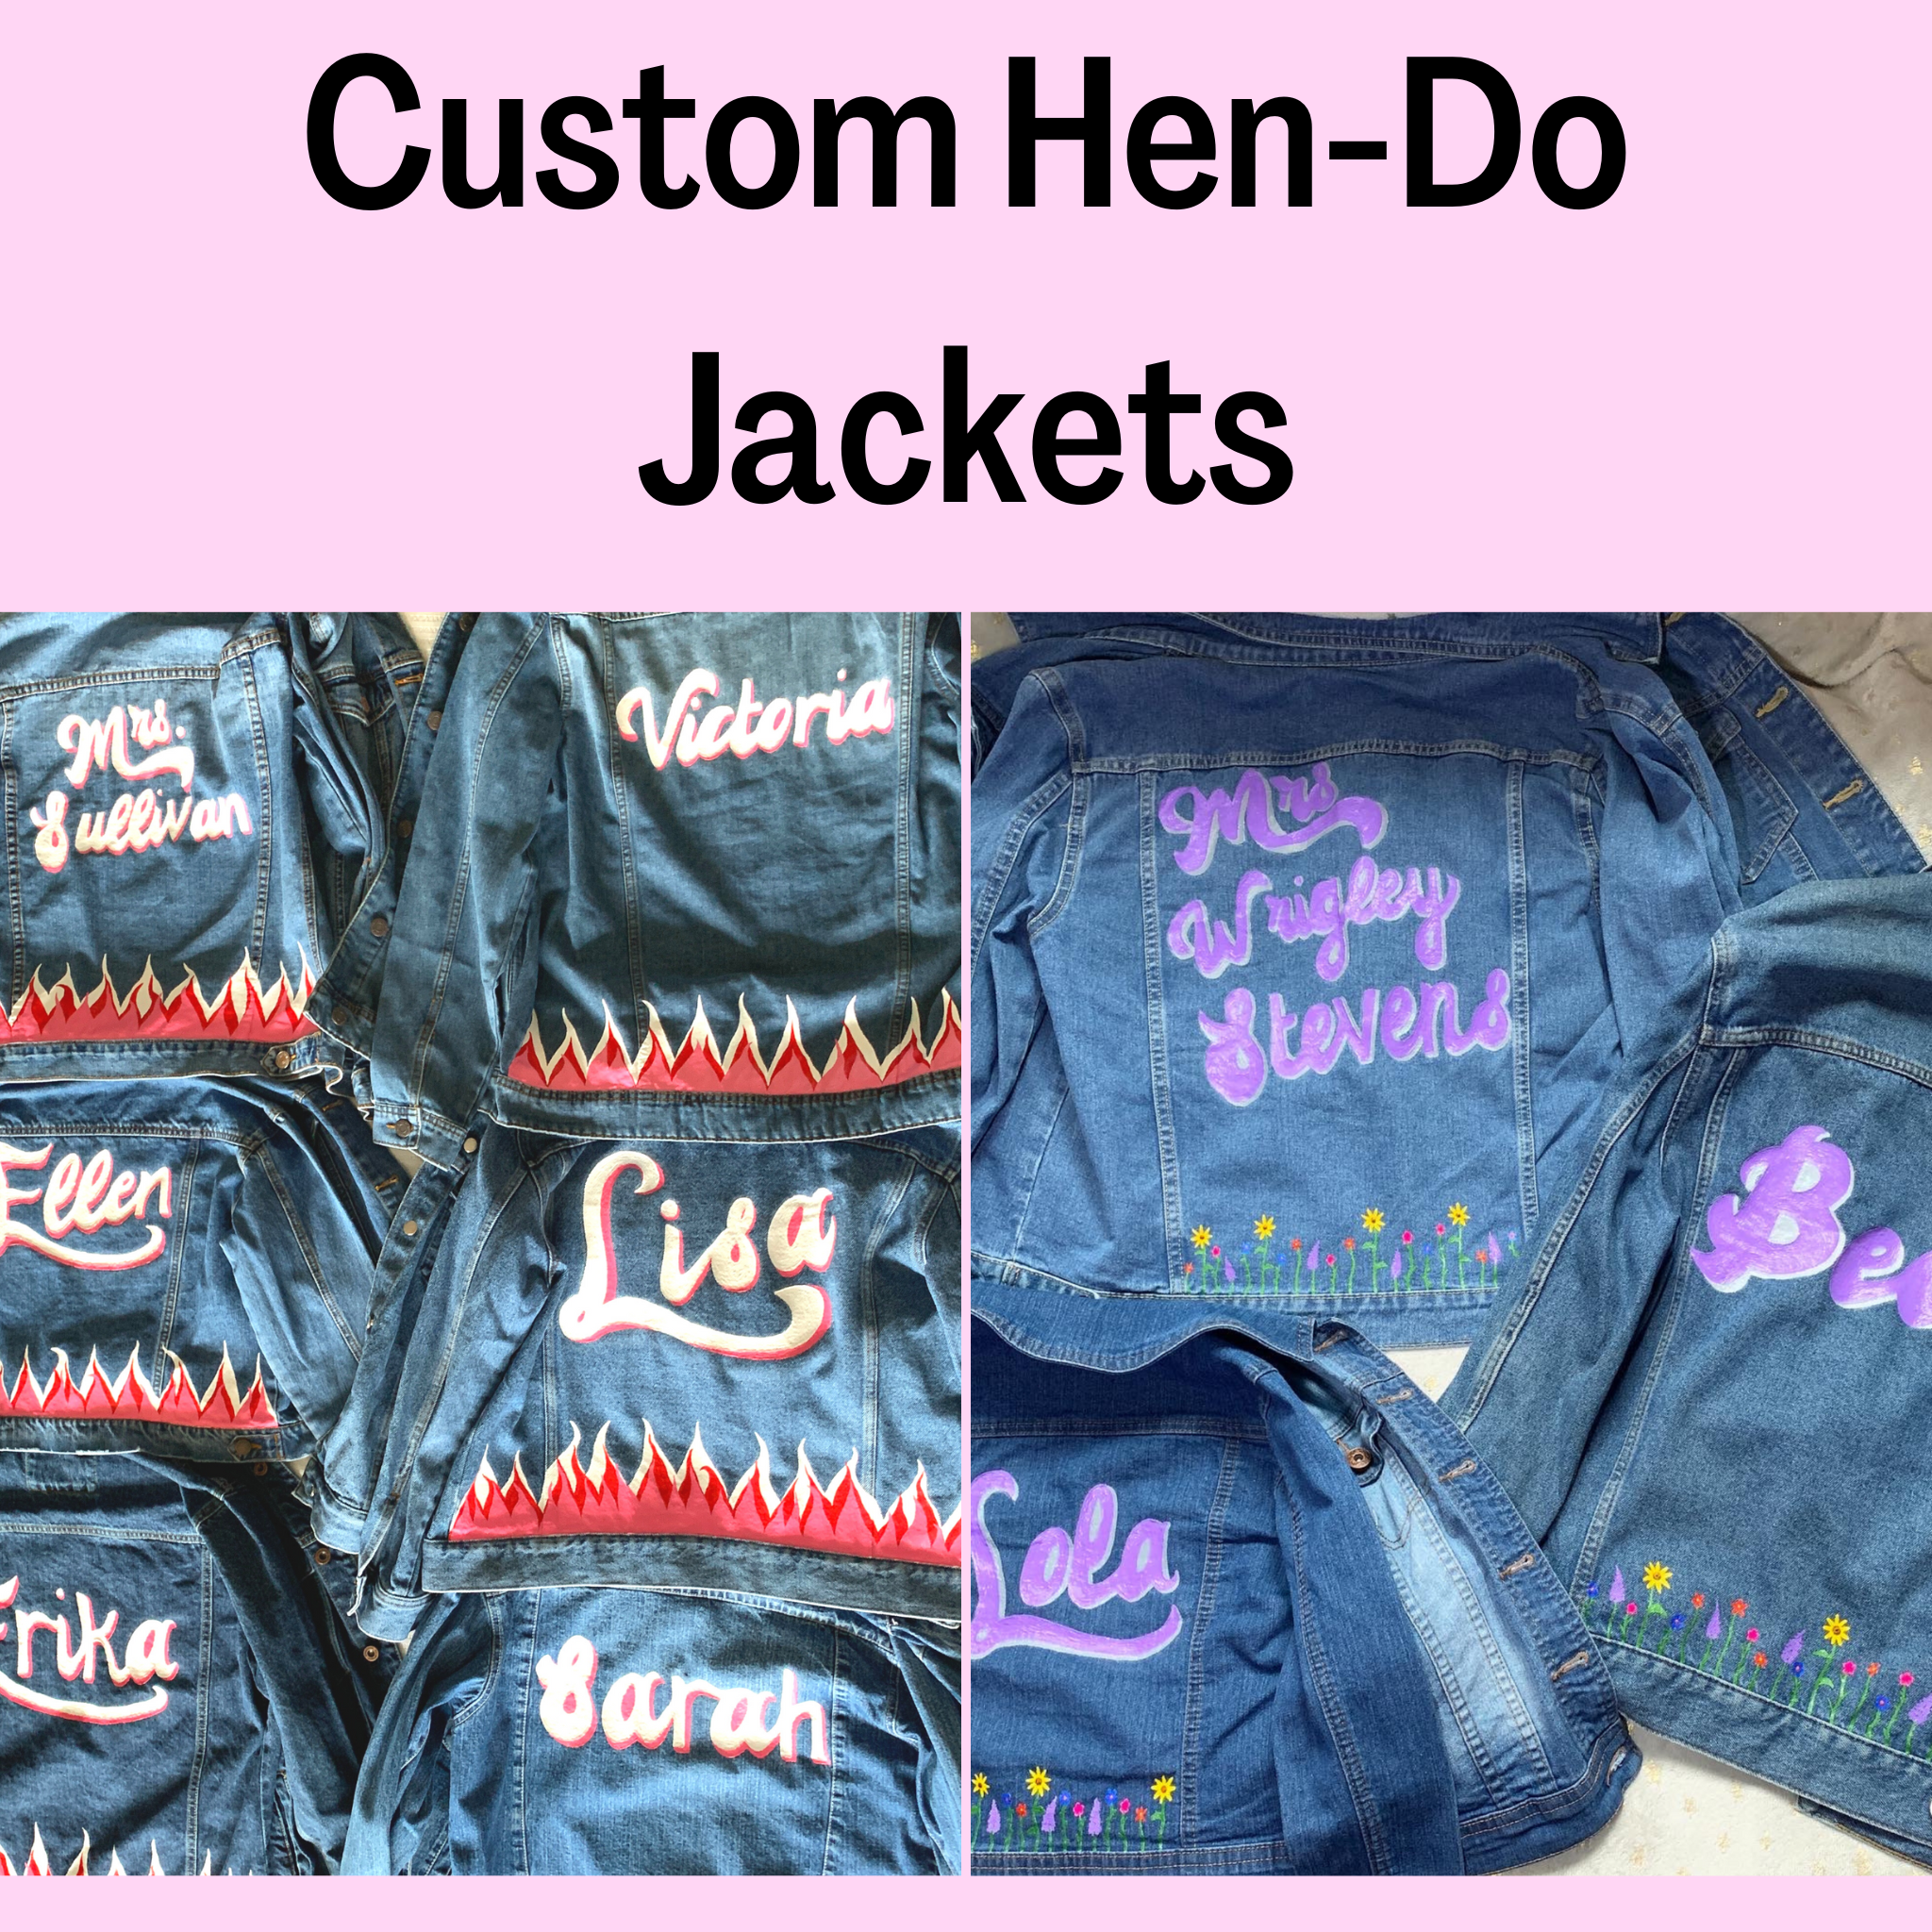 Customized Jackets For Men's And Women's (In Jeans) - Design Your Own |  Online gift shopping in Pakistan